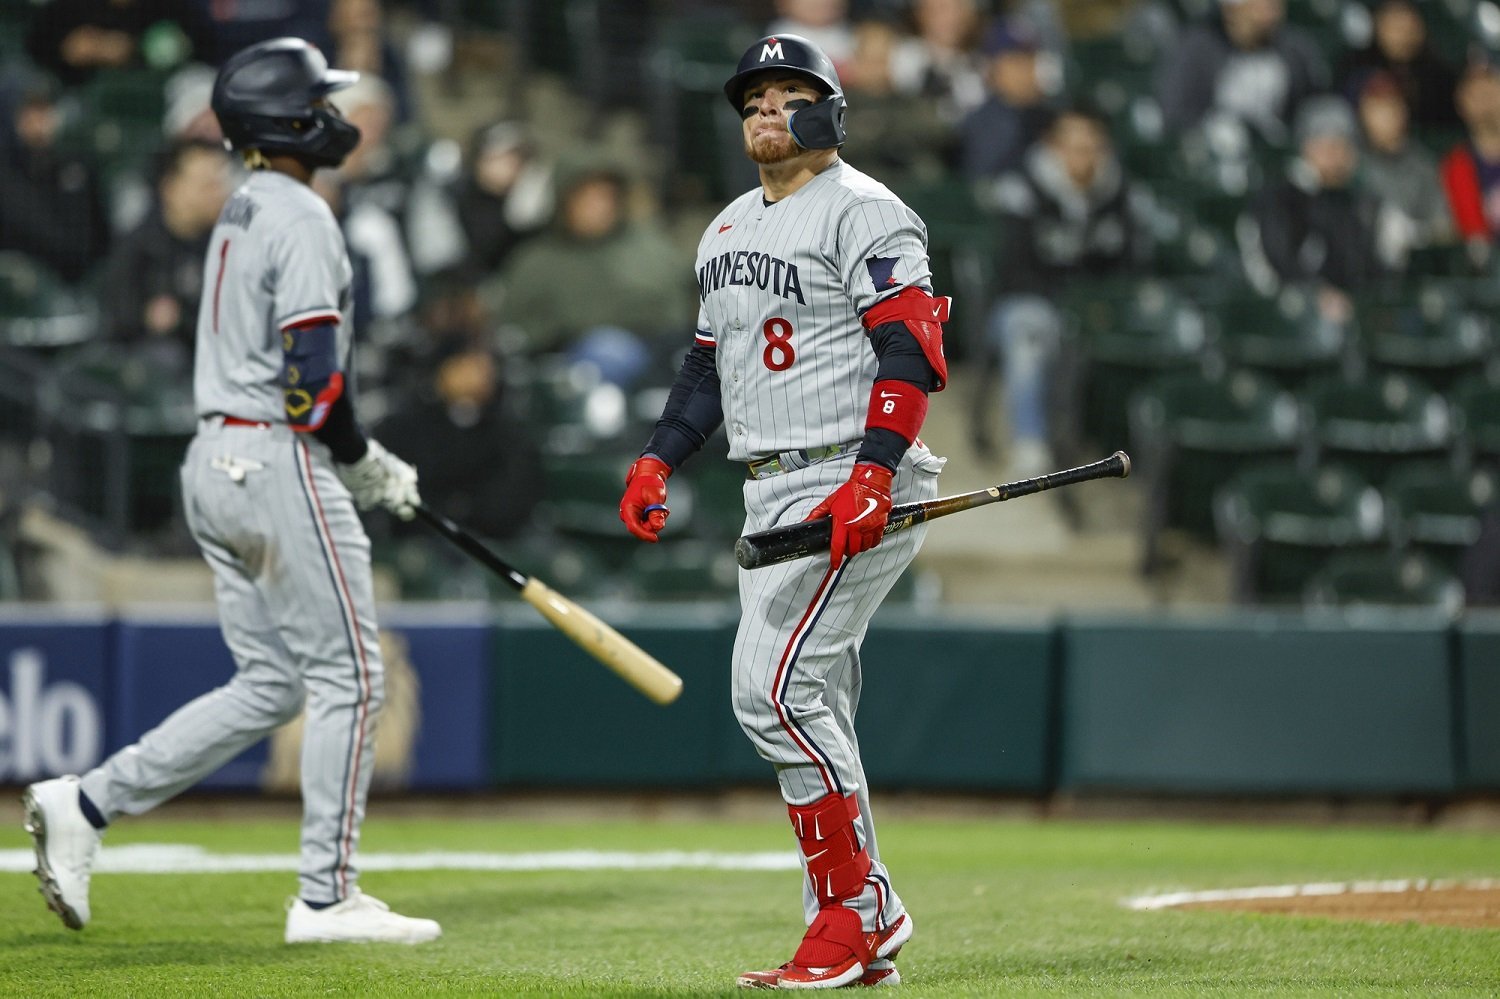 Christian Vázquez is Flashing Some Red Flags - Twins - Twins Daily